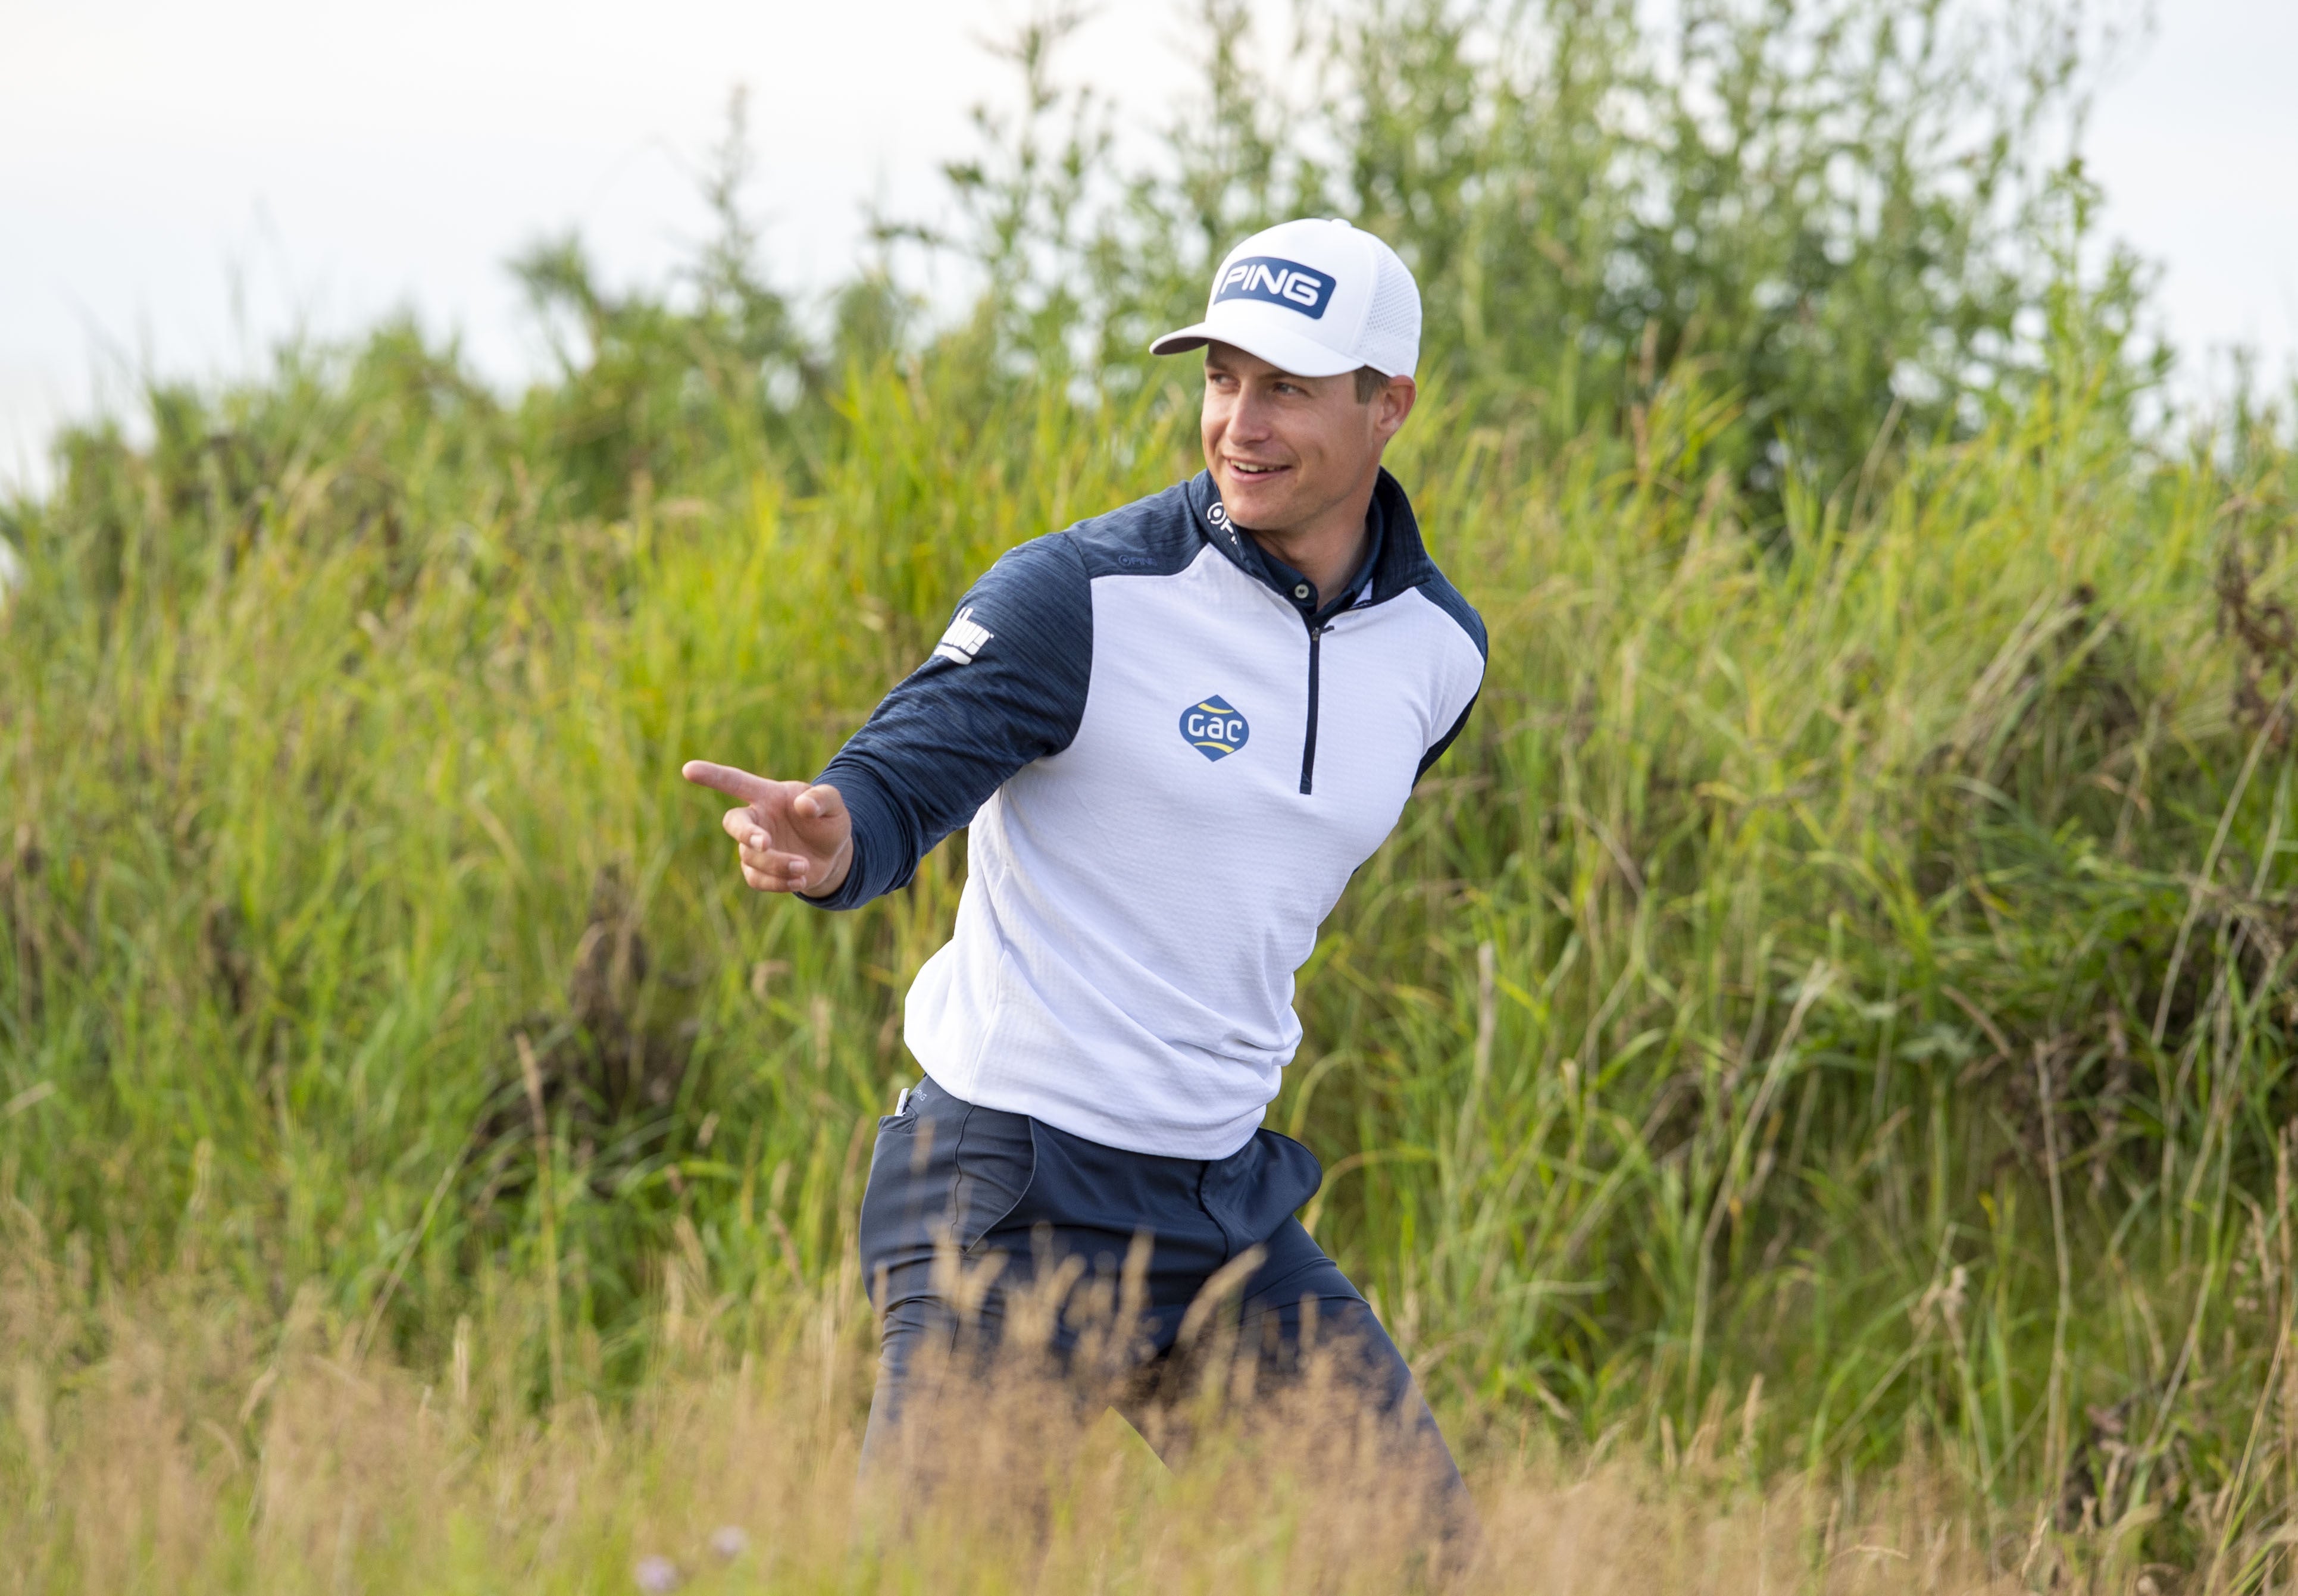 Scotland’s Calum Hill claimed a one-shot lead in the Hero Open at Fairmont St Andrews (Ian Rutherford/PA)